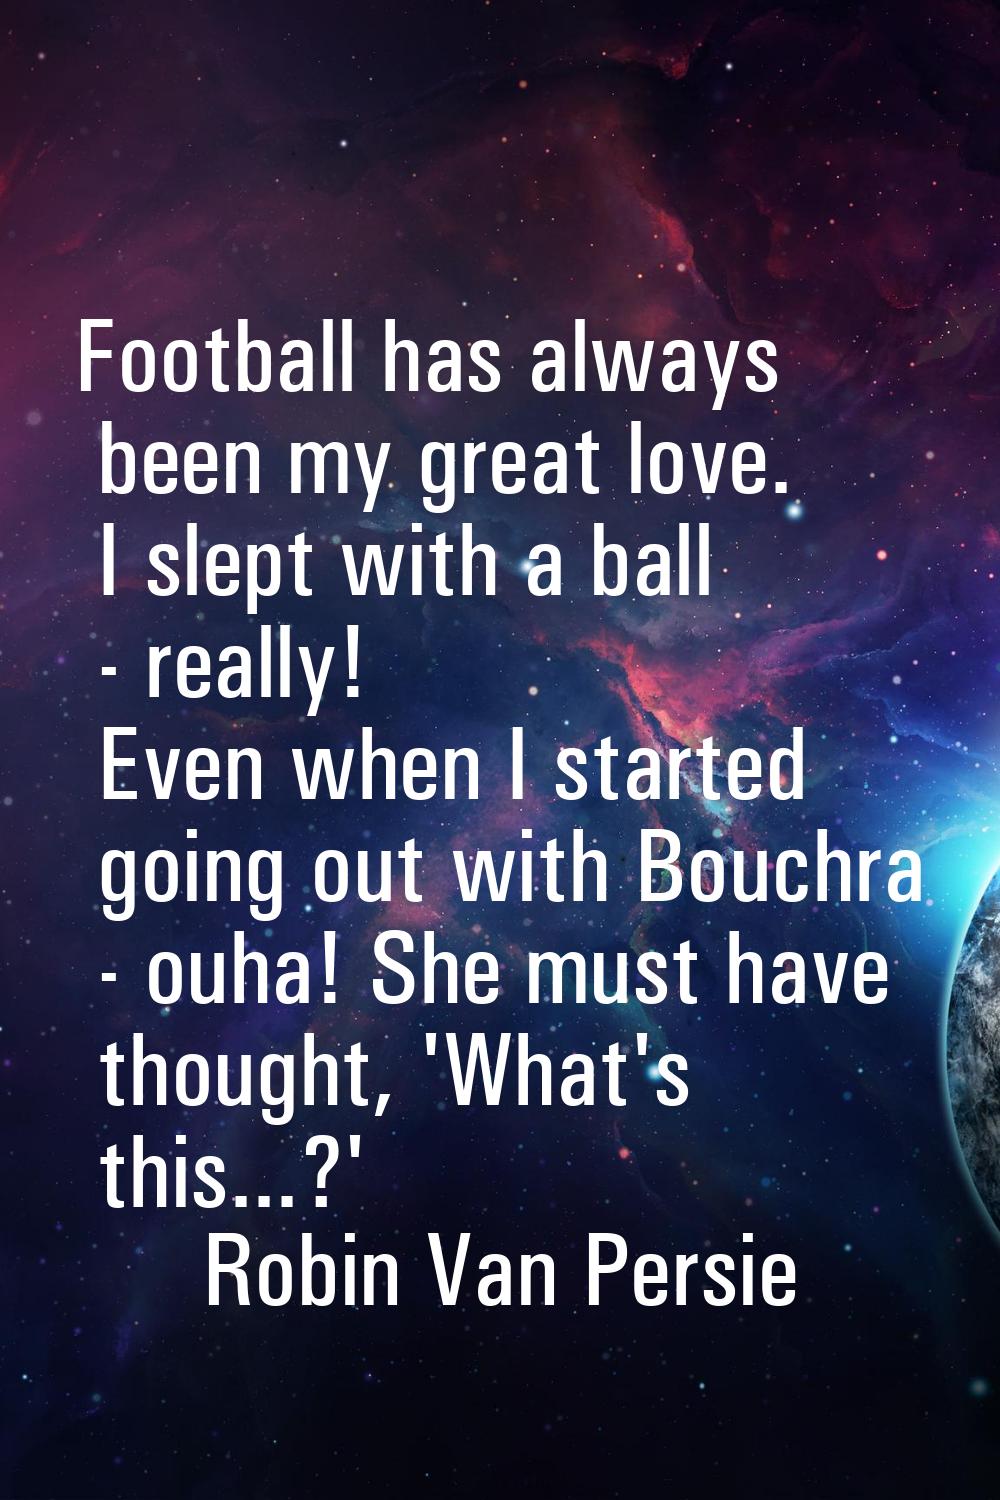 Football has always been my great love. I slept with a ball - really! Even when I started going out